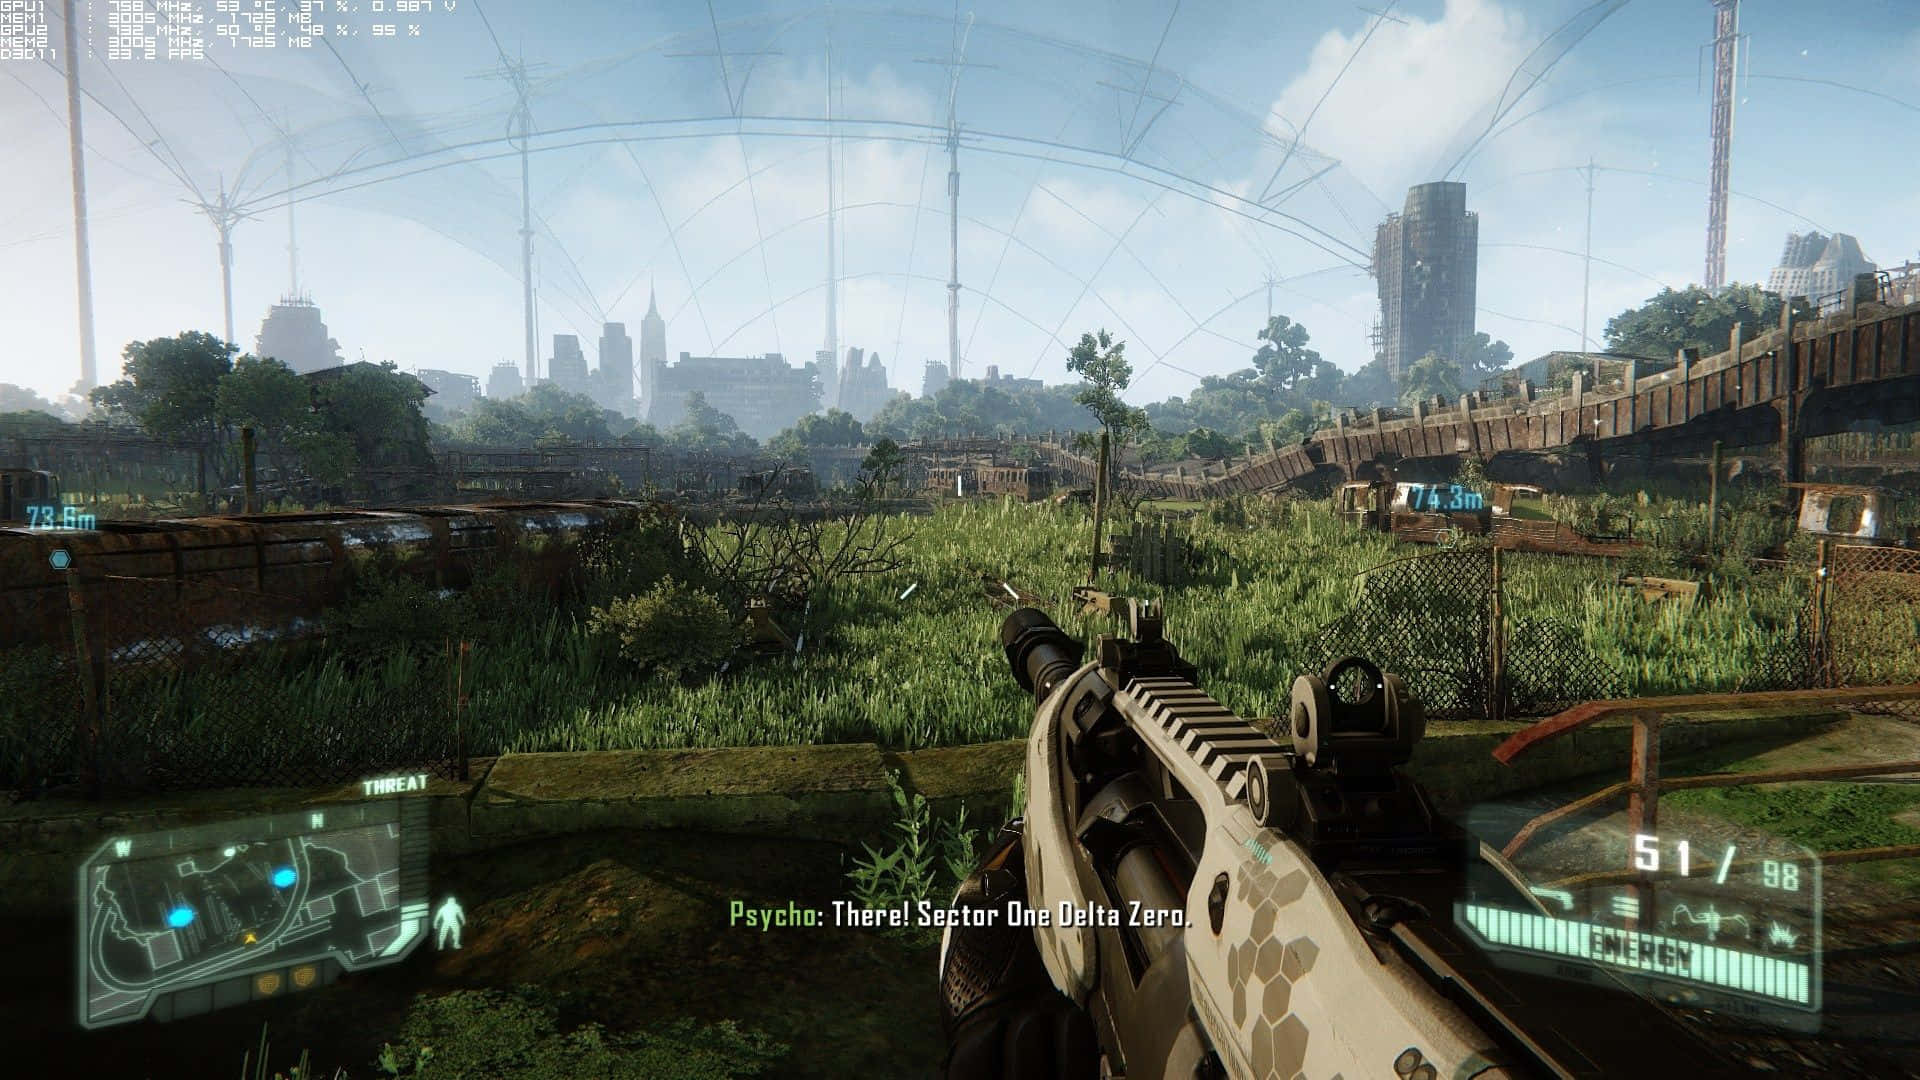 The Sunrays Reveal An Epic Cityscape In Crysis 3 Wallpaper